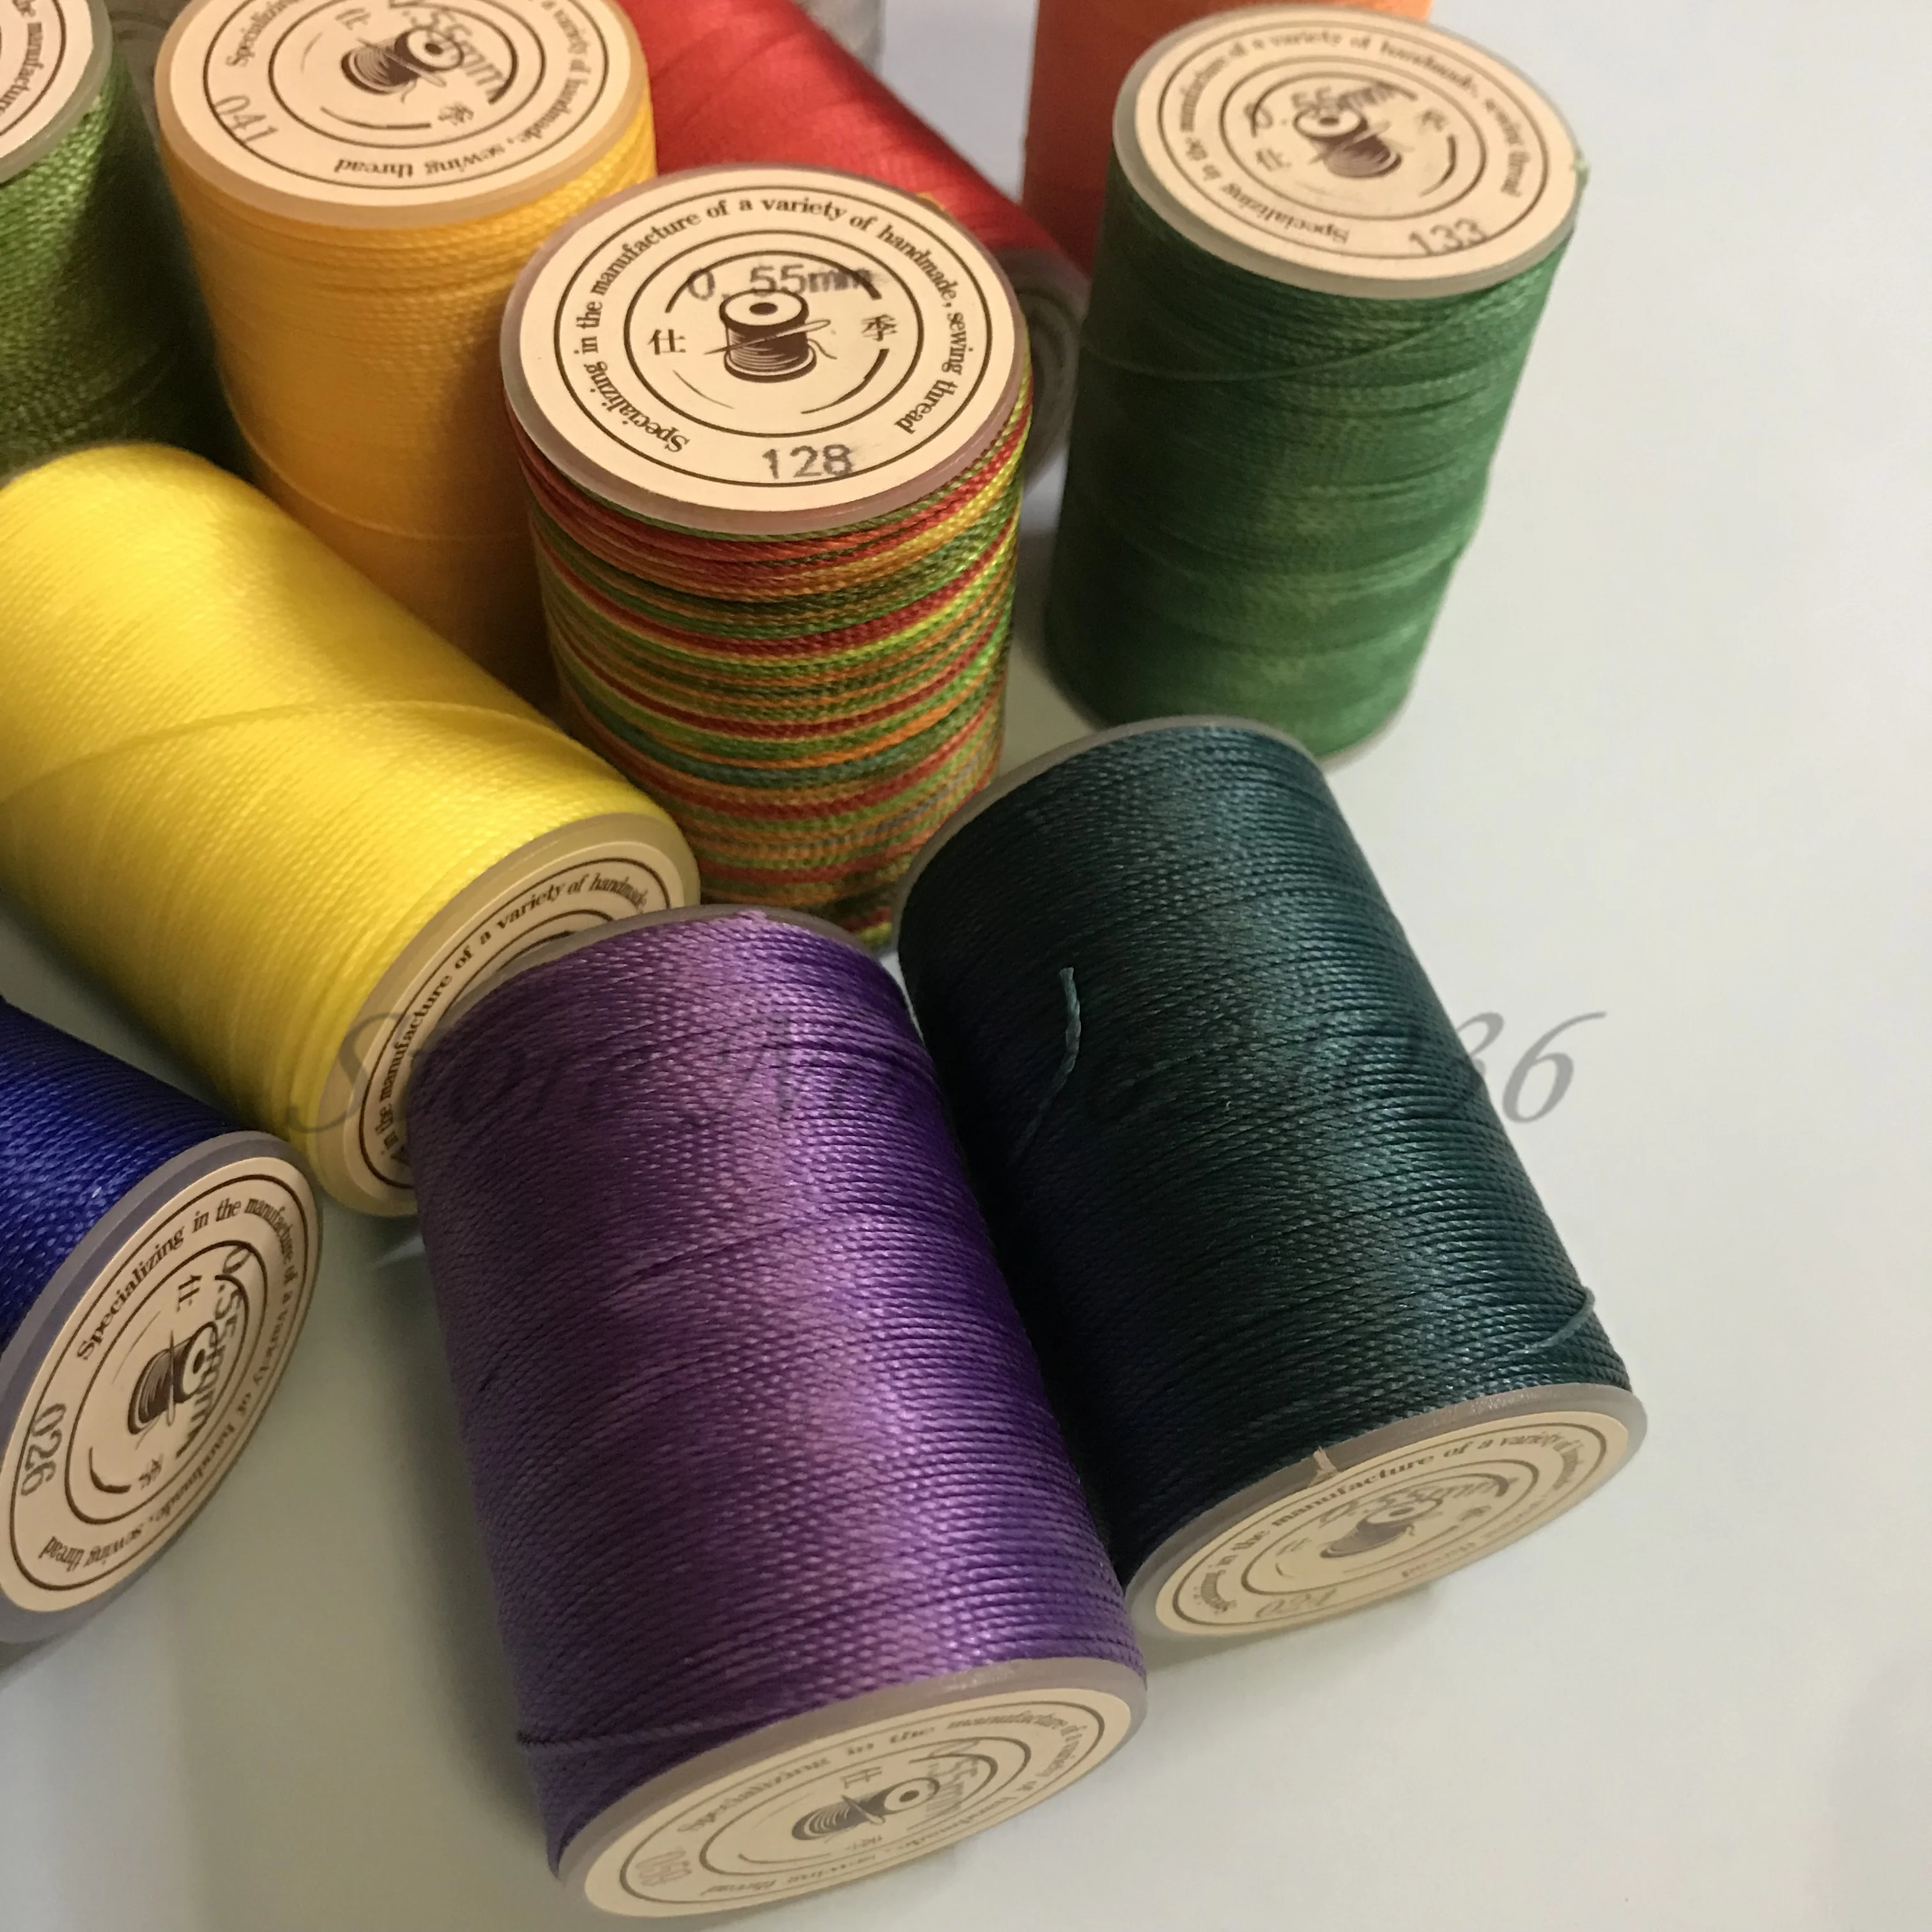 SJ005 New Arrival 0.55mm Round(Twist) Ployester Waxed String Thread for  Leather Sewing Stitching